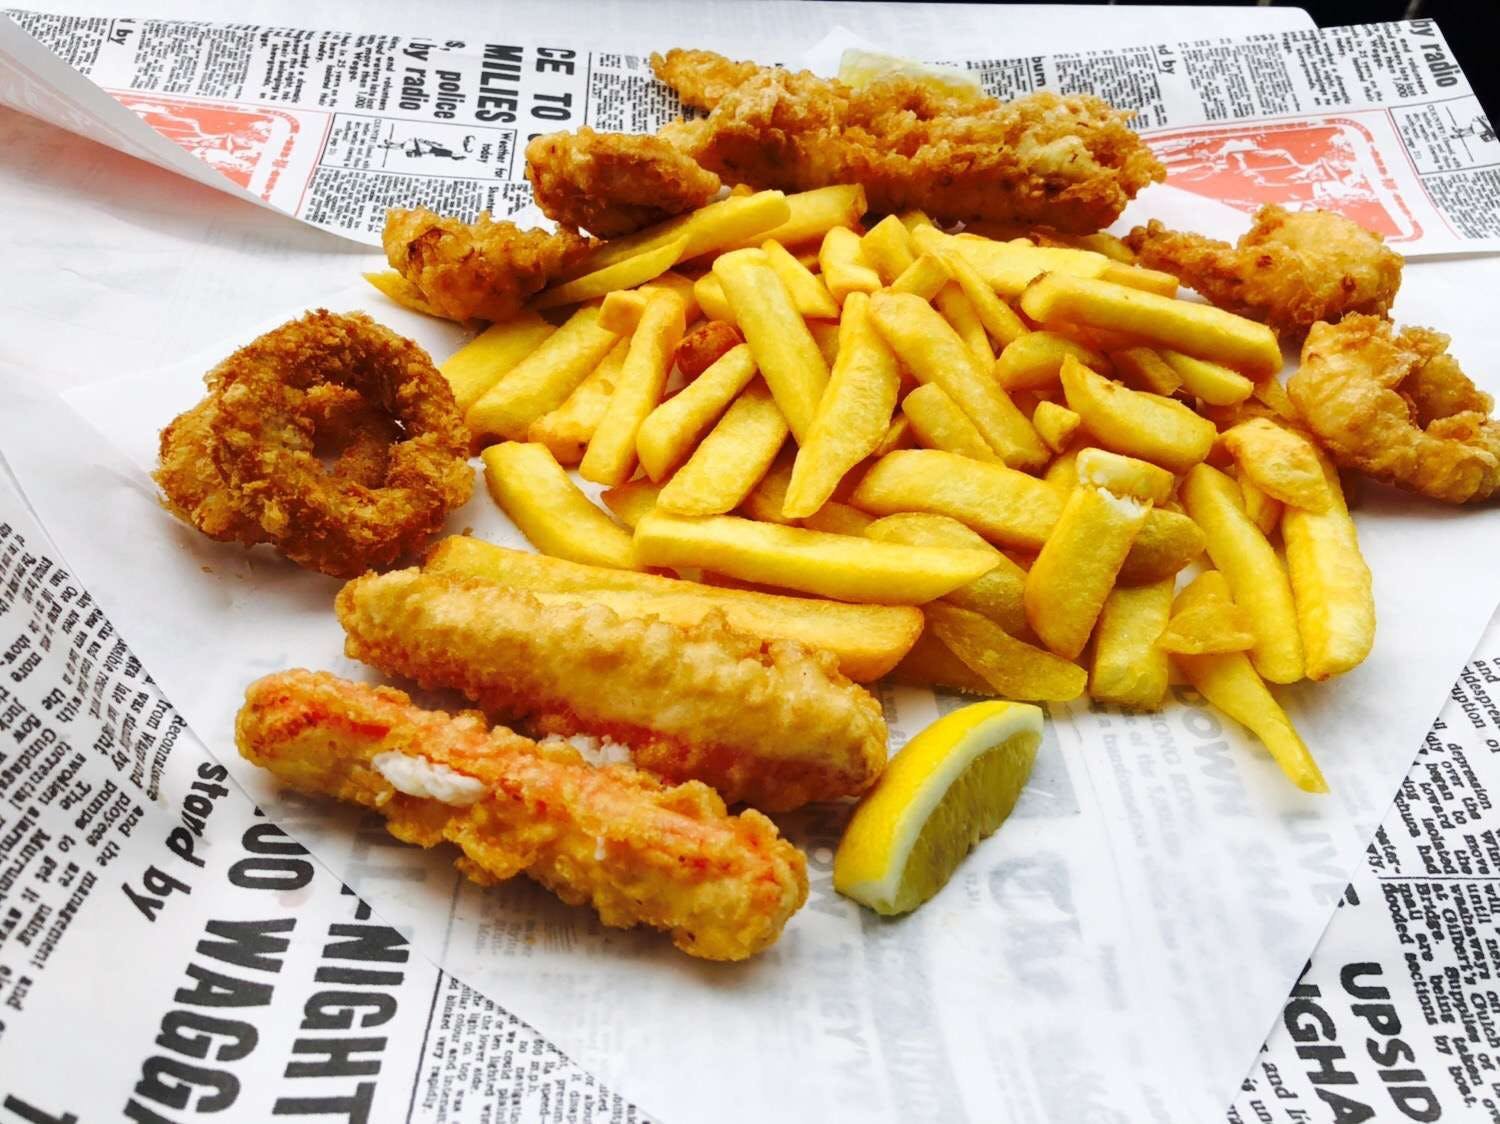 Oakleigh Fish  Chippery - Surfers Paradise Gold Coast